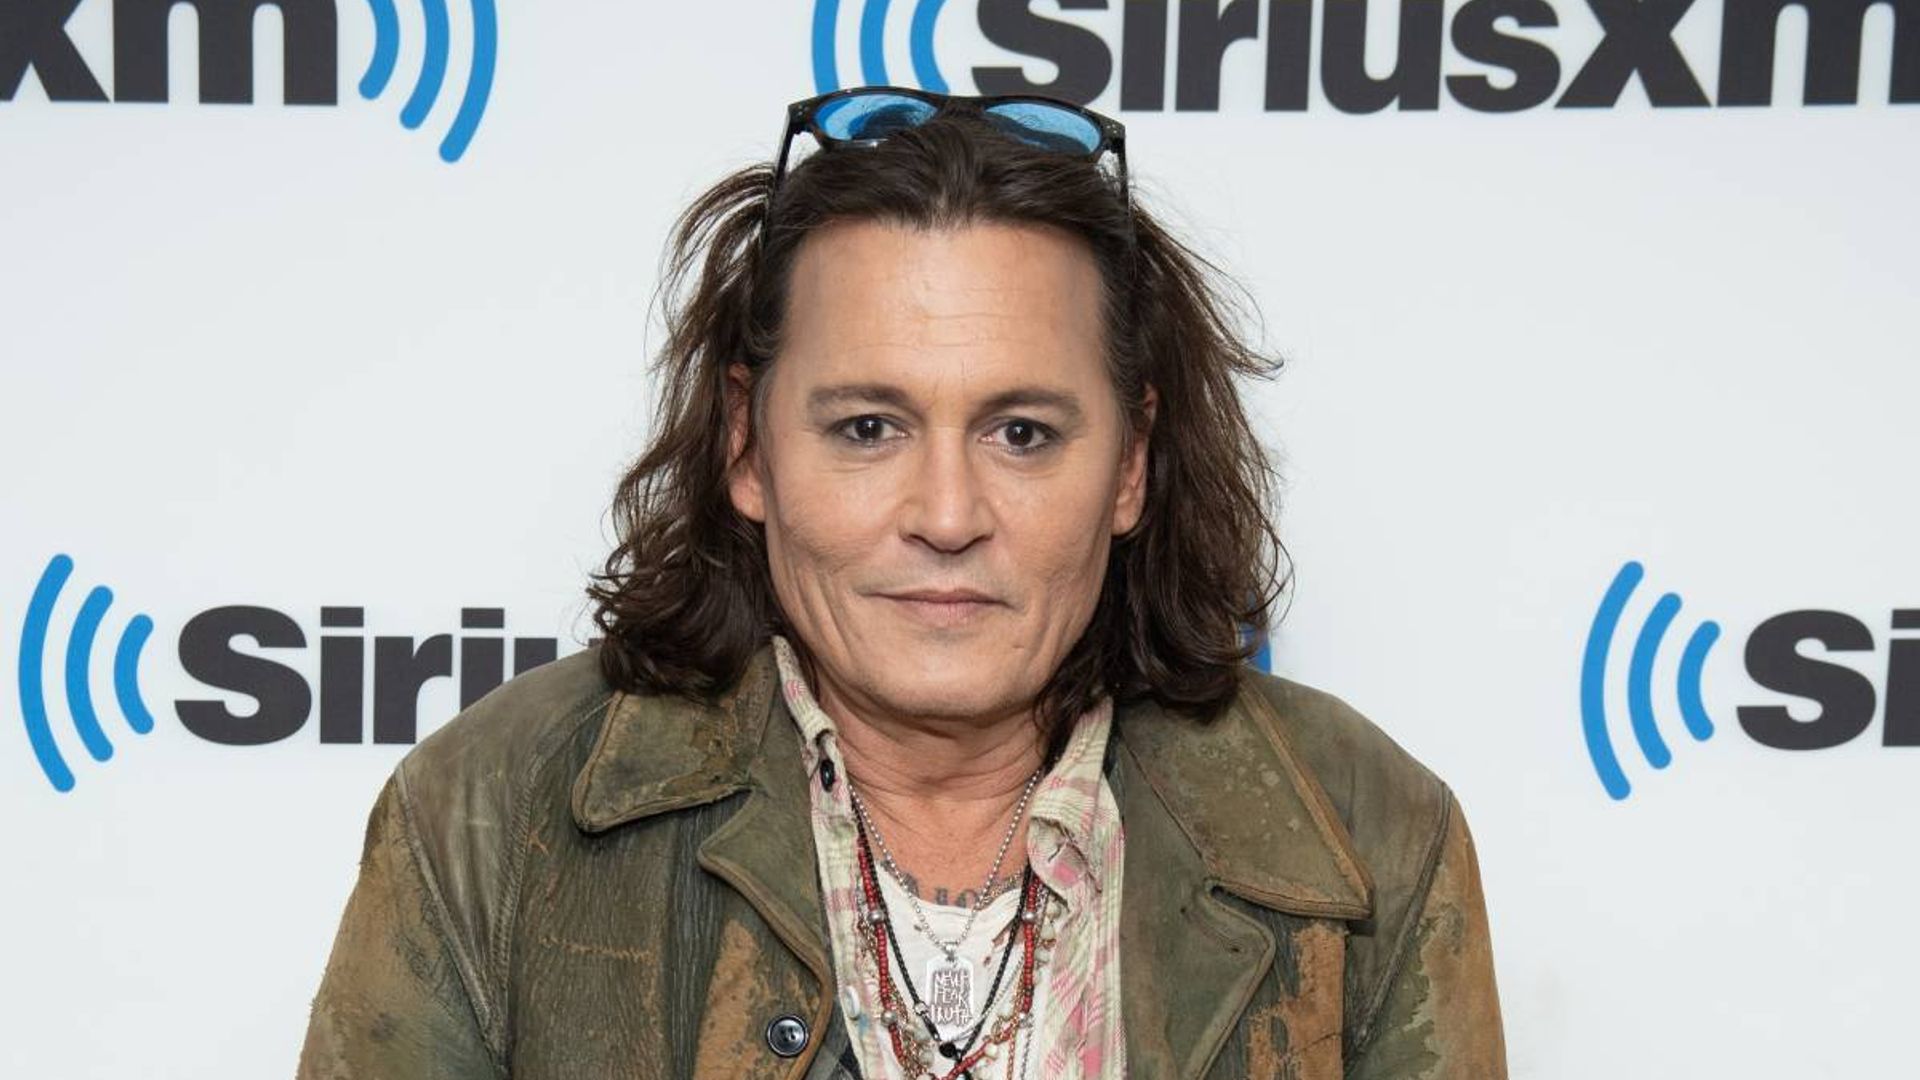 Johnny Depp stuns fans with utterly unrecognizable appearance in latest video - sparks reaction